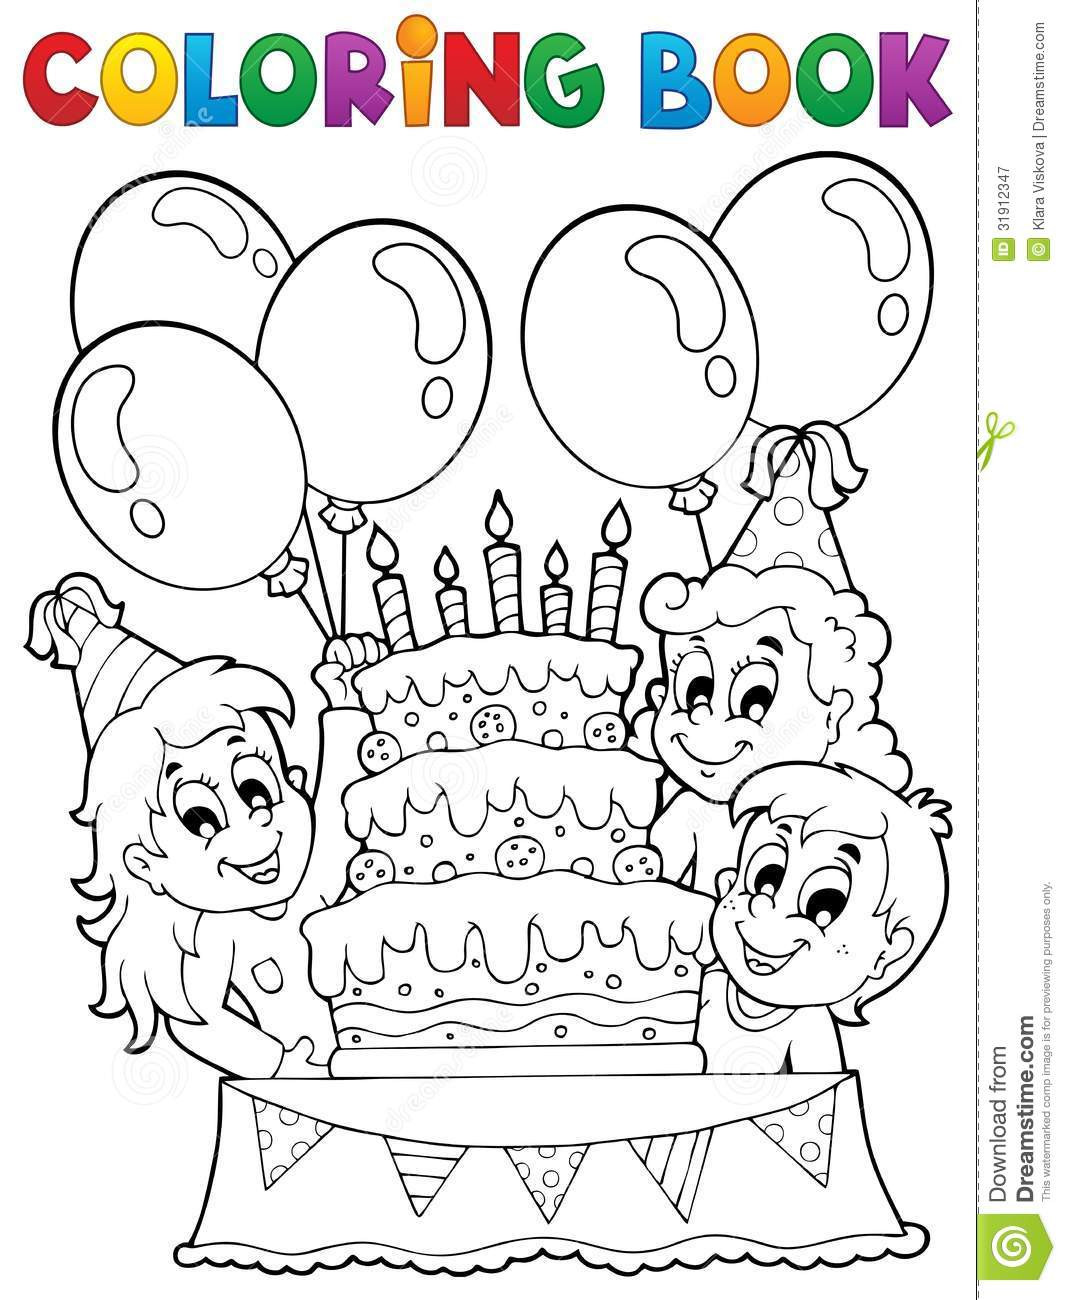 Coloring Book Toddler
 Coloring Book Kids Party Theme 2 Stock Vector Image